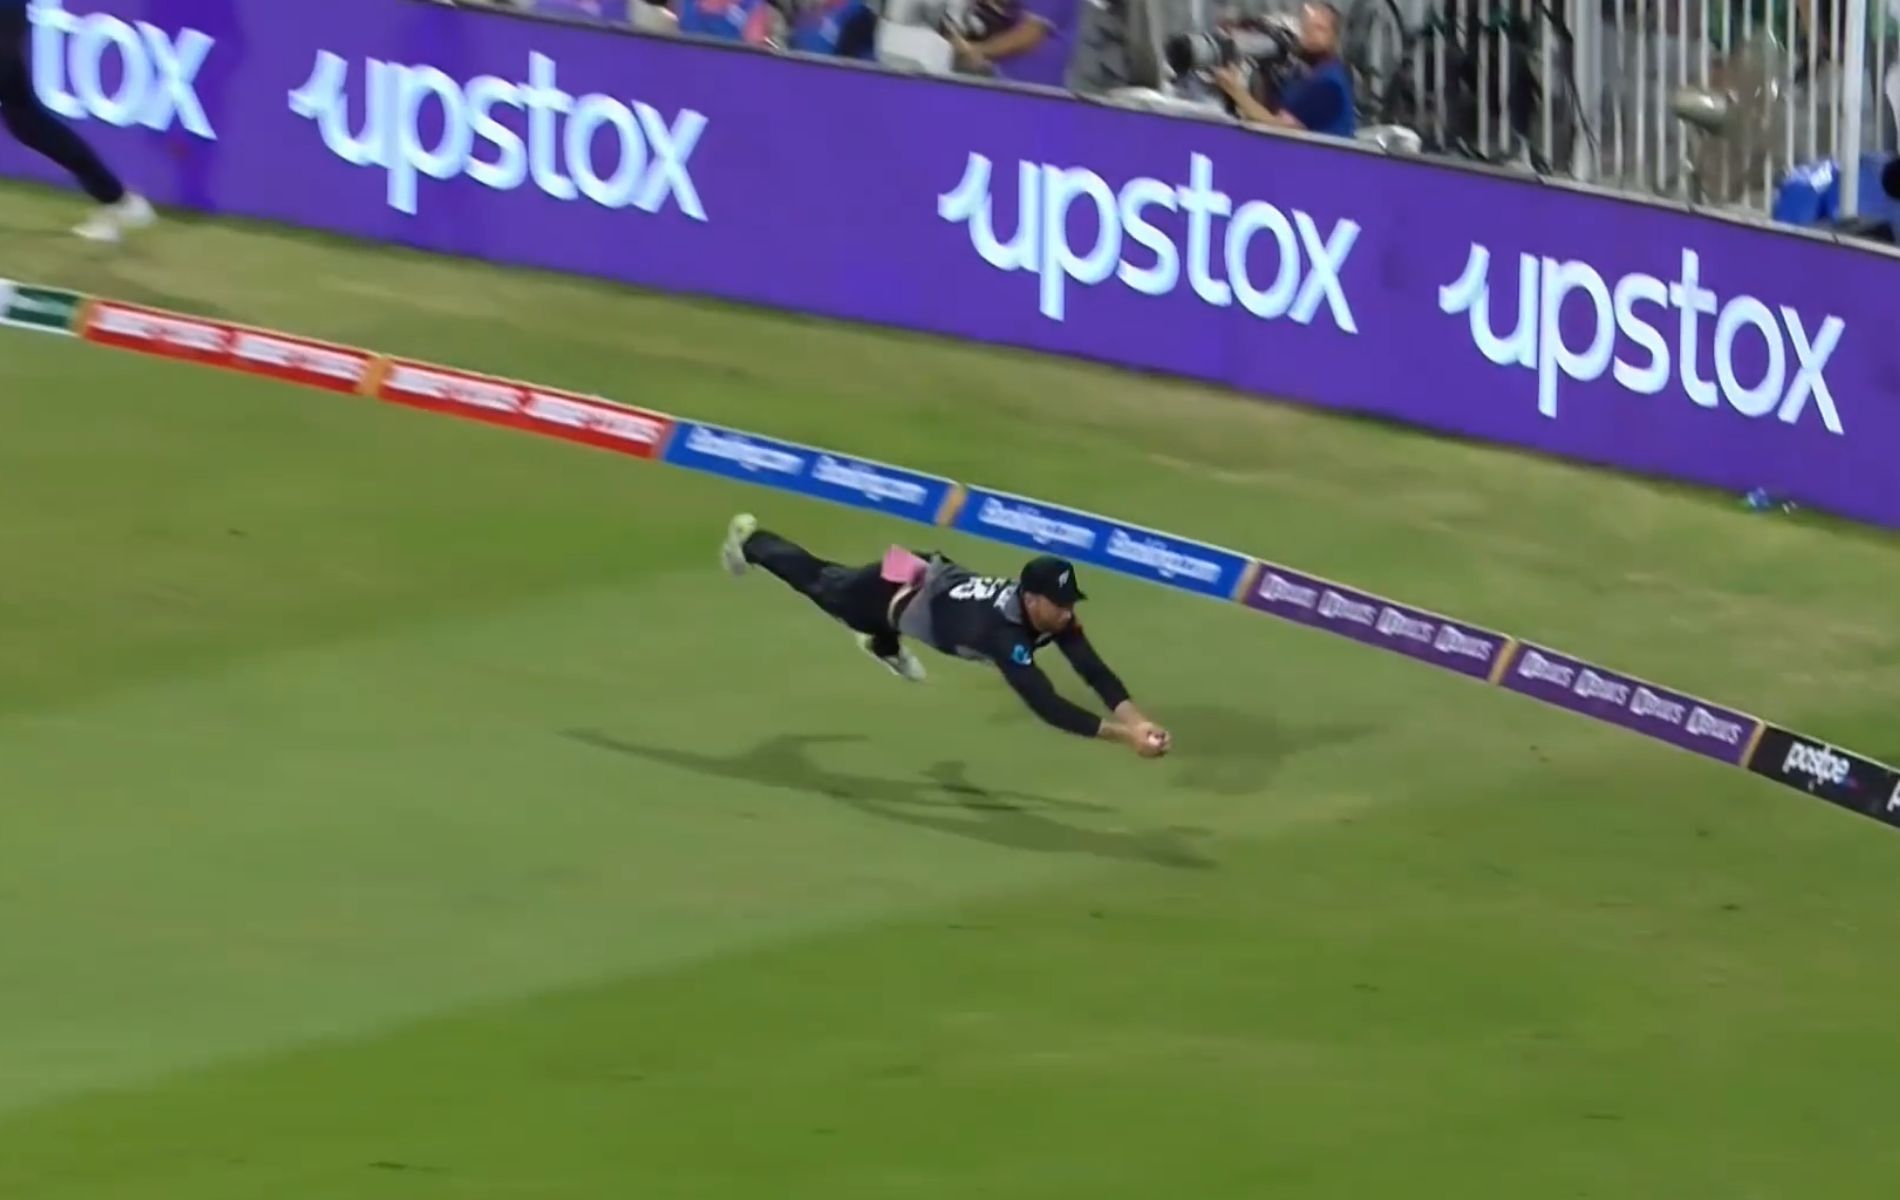 Devon Conway took a stunning diving catch to dismiss Mohammad Hafeez against Pakistan.